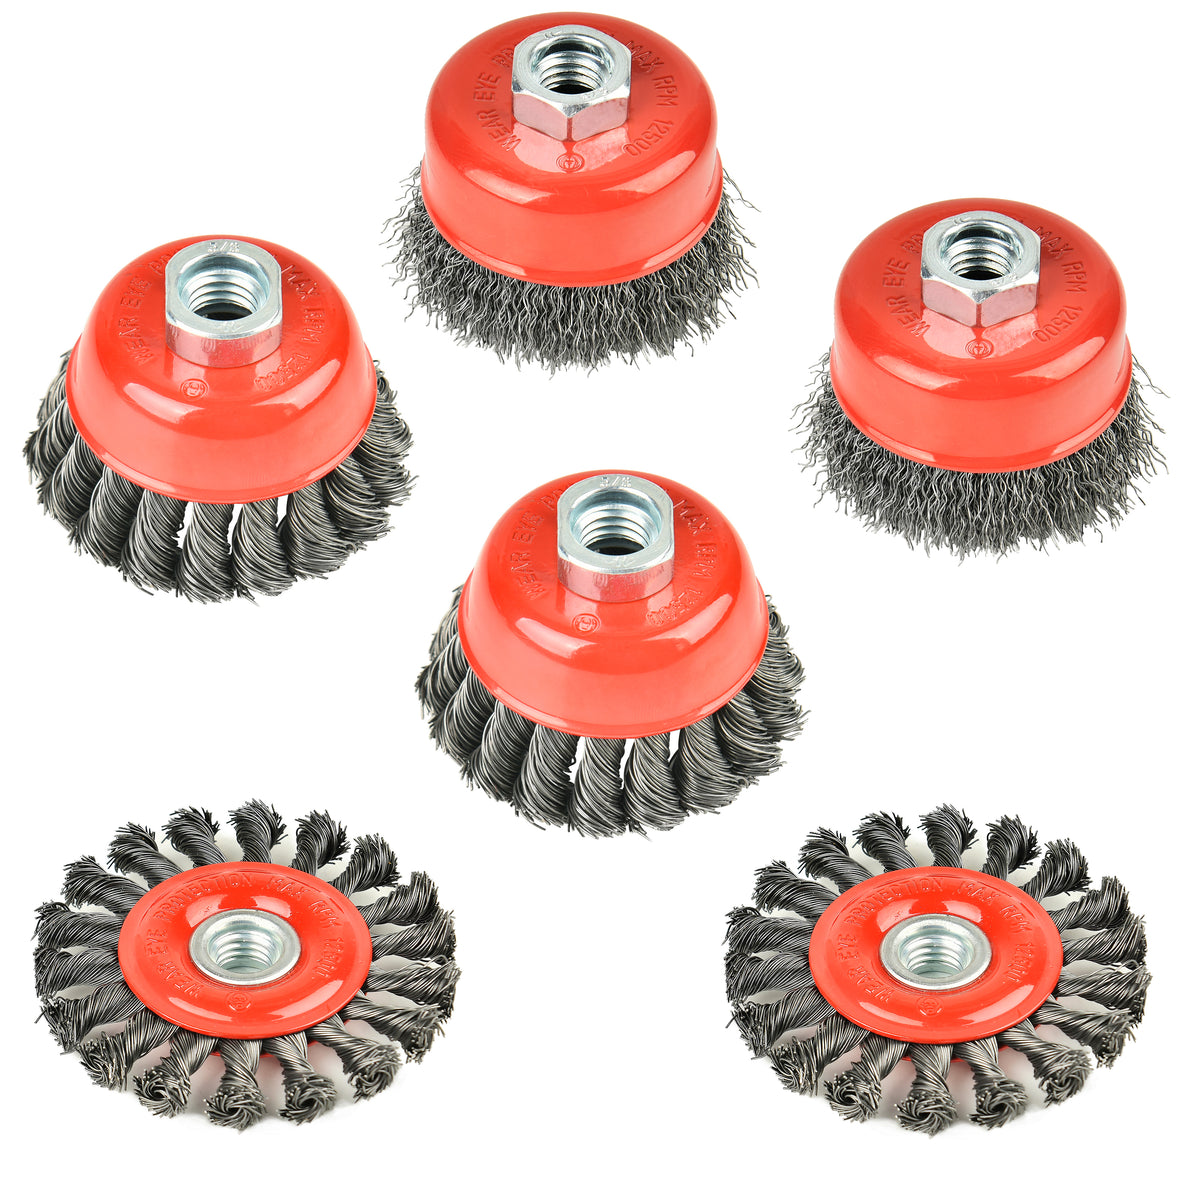 TILAX 3'' Wire Wheel Cup Brush End Brush Set Germany